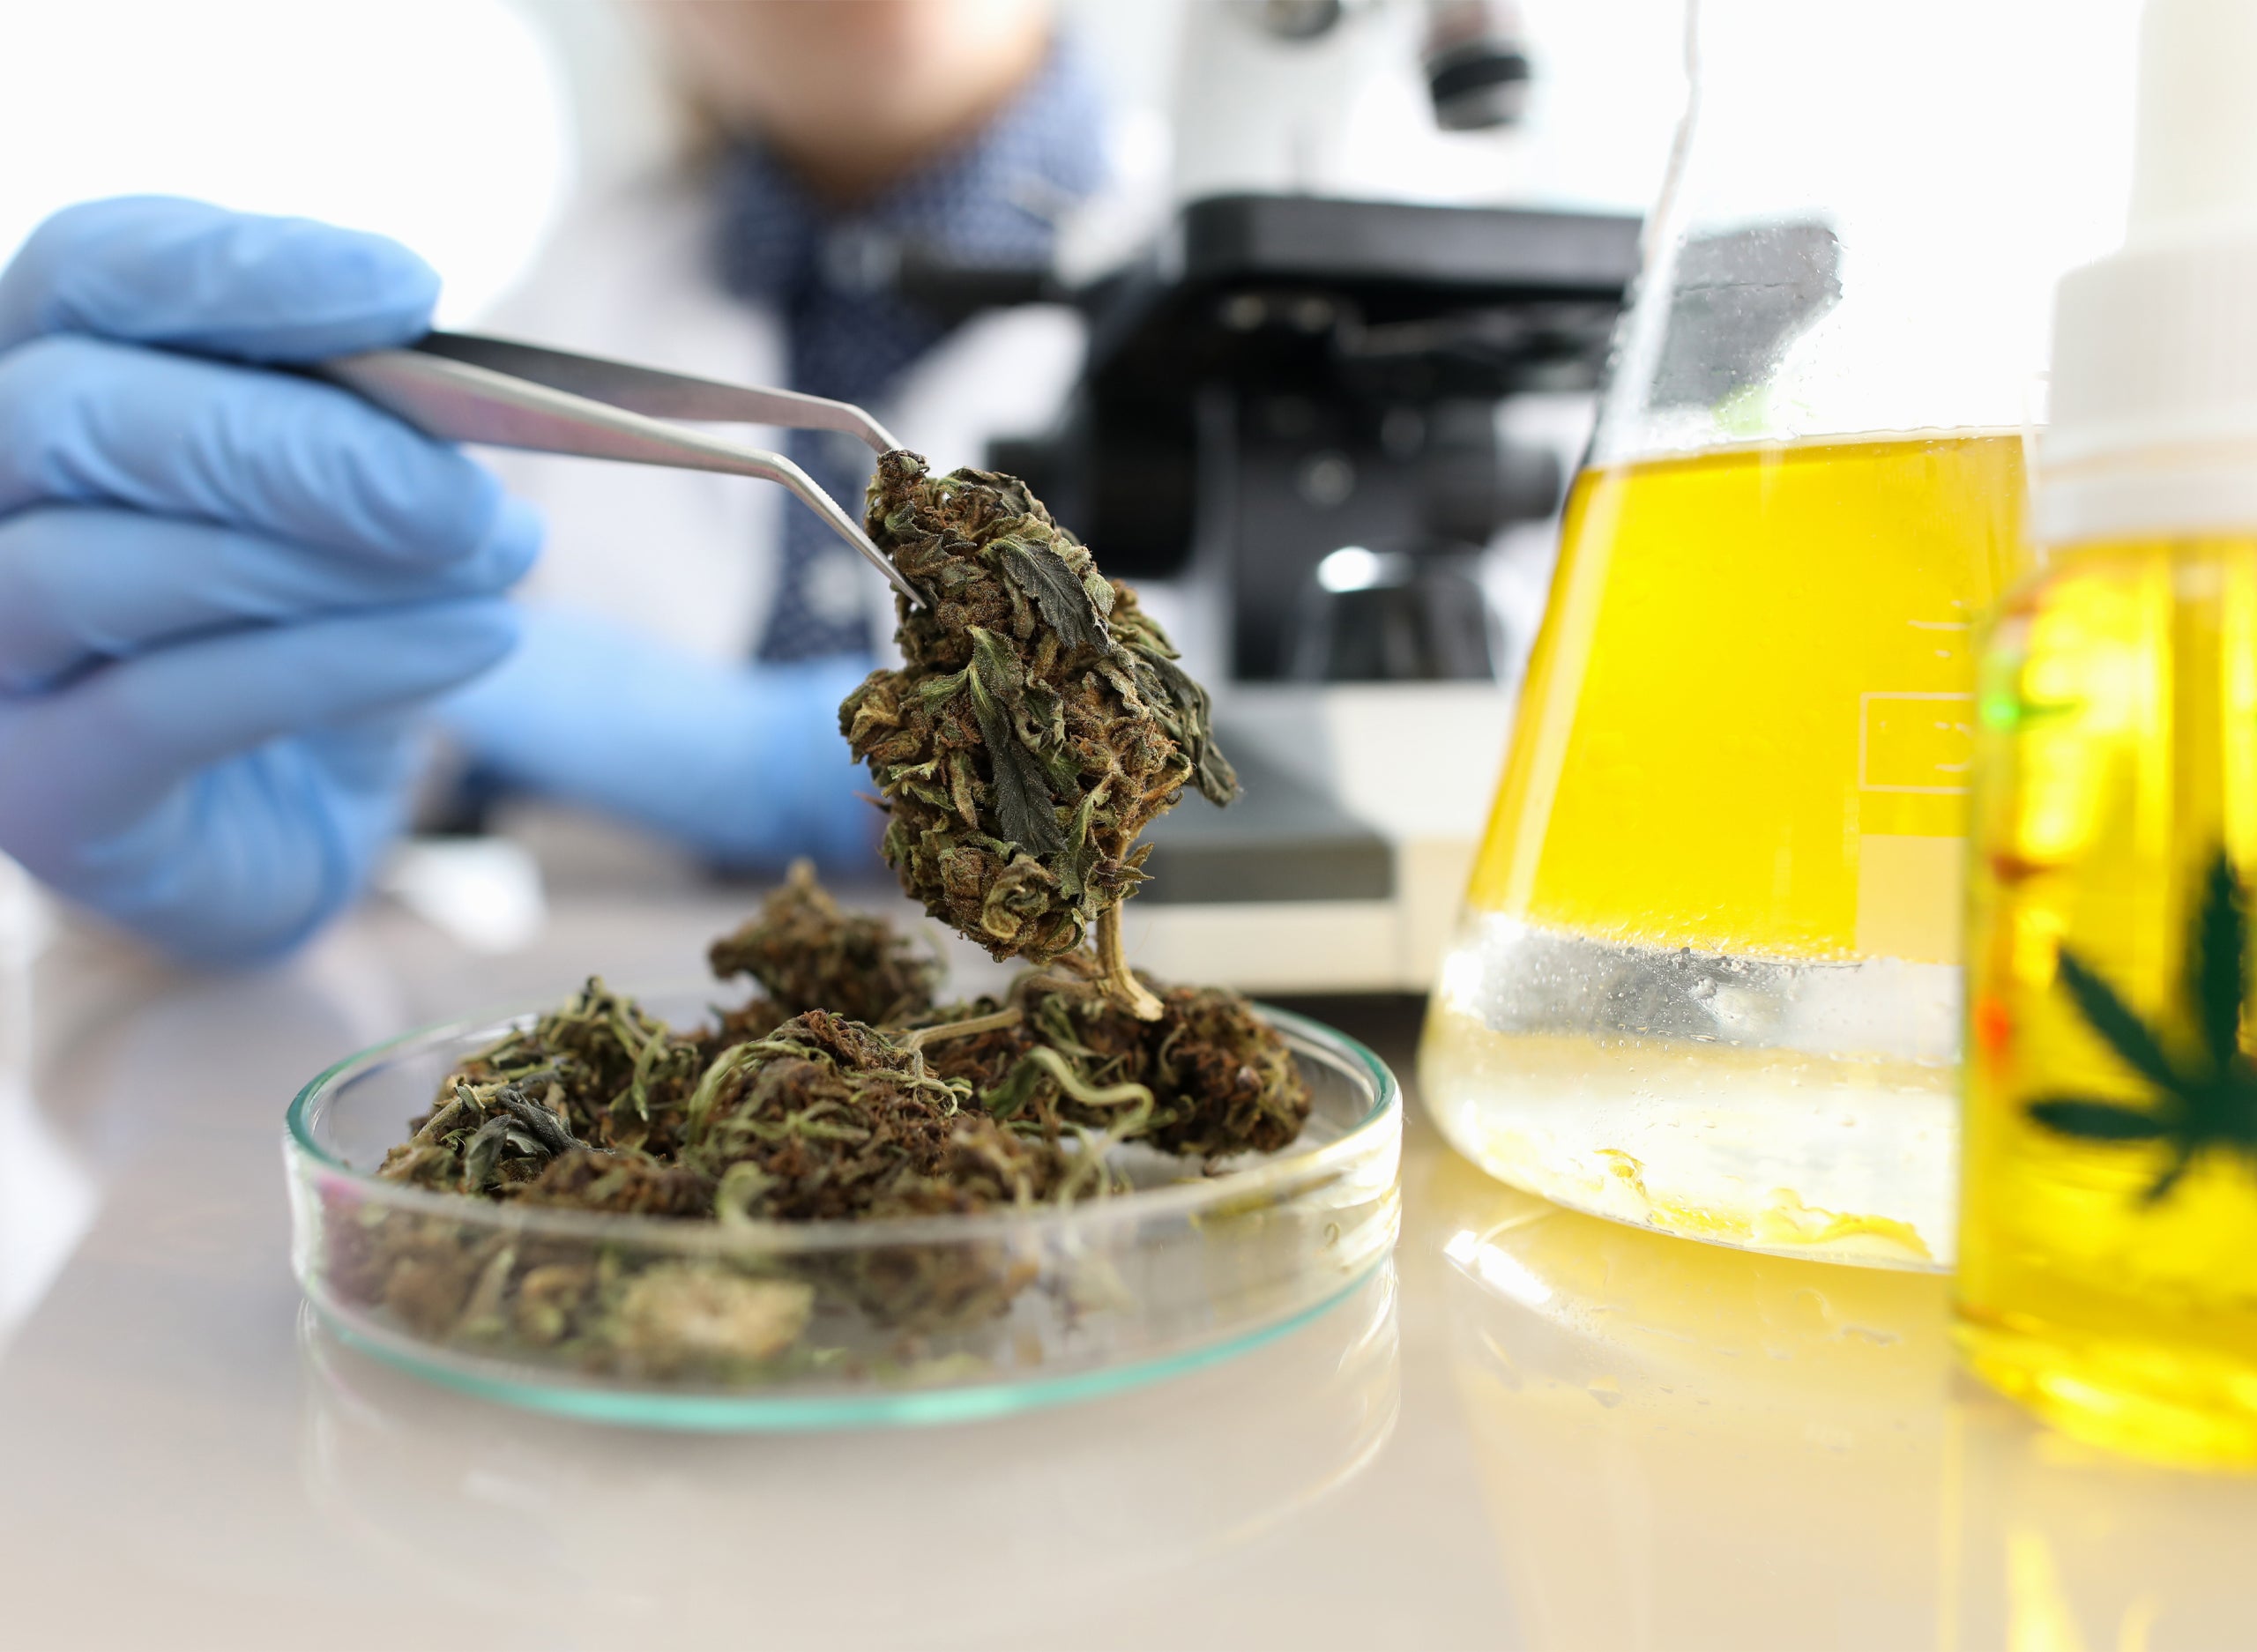 Israeli Company Clone Cannabis Cells With 12x The Potency